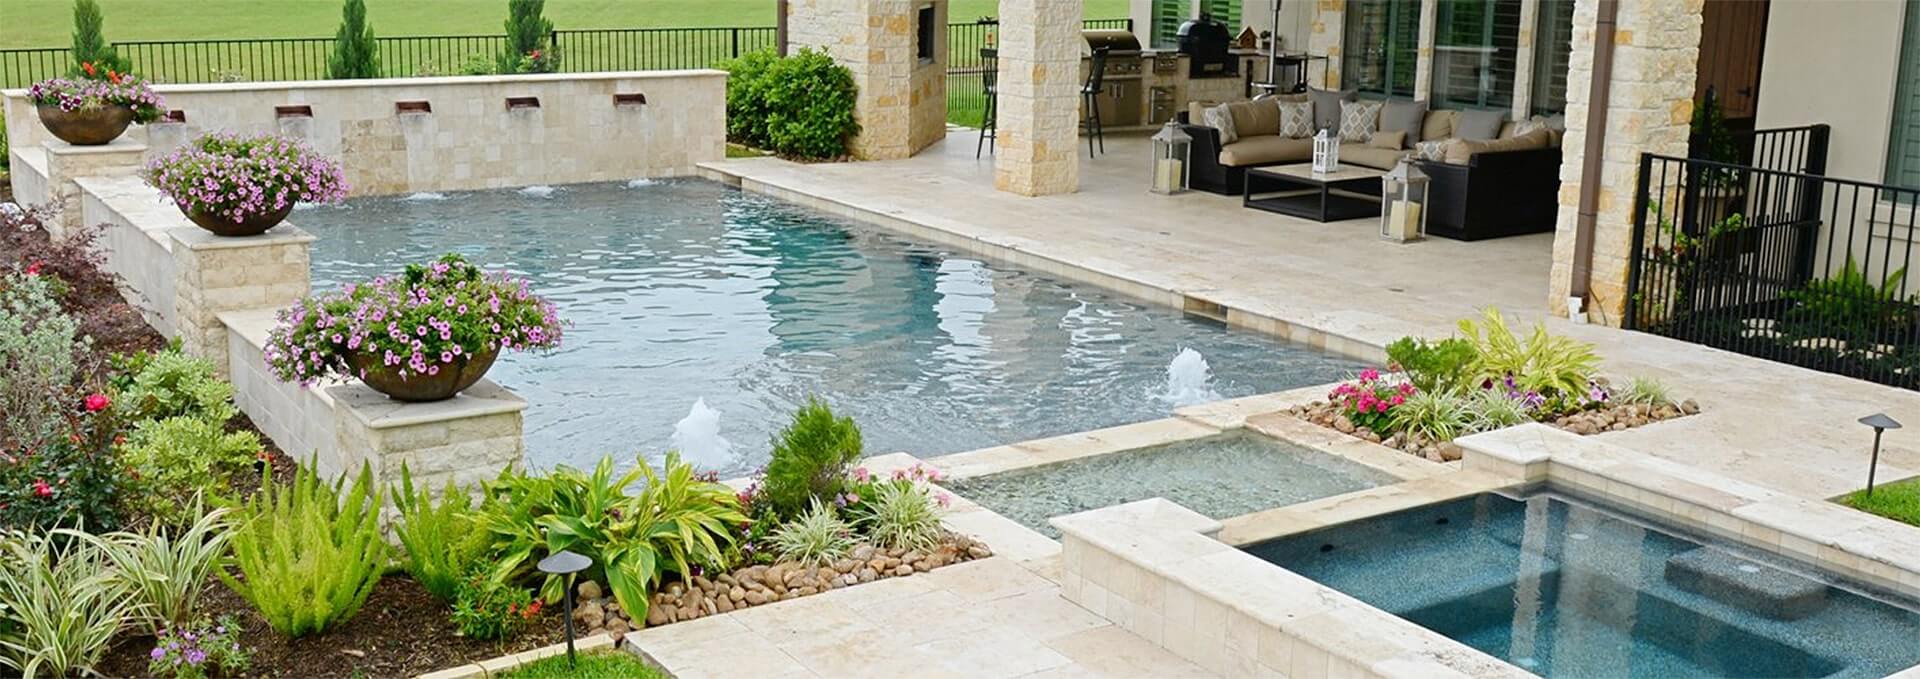 Enhance Your Home with Lasting Swimming Pools Designed and Installed By Expert Builders Across the State of Florida